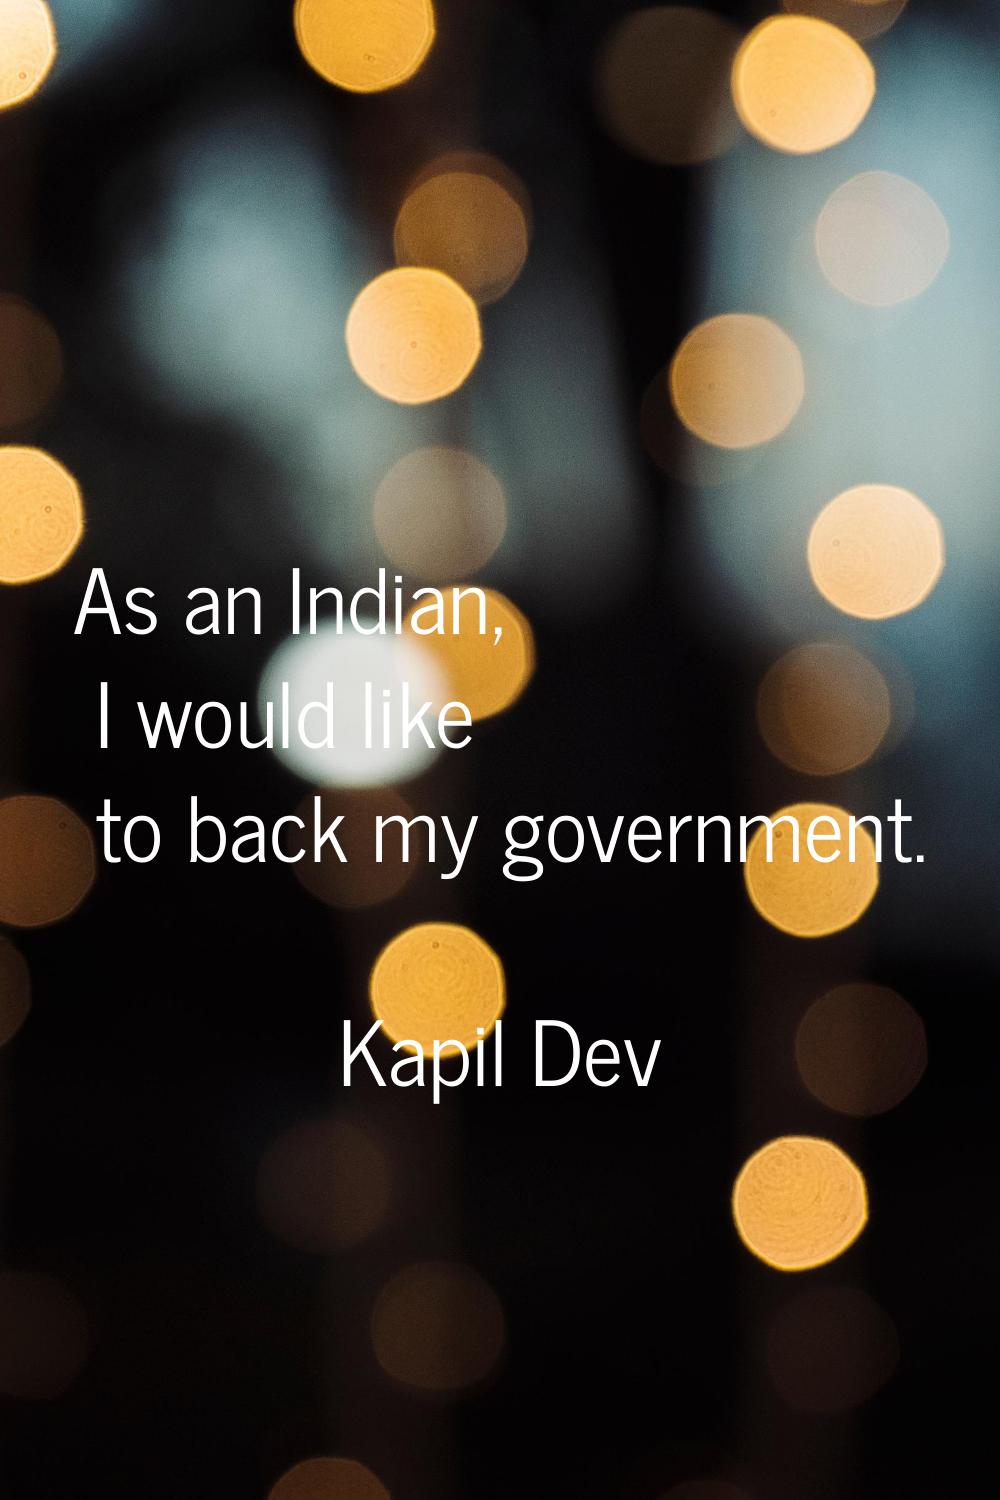 As an Indian, I would like to back my government.